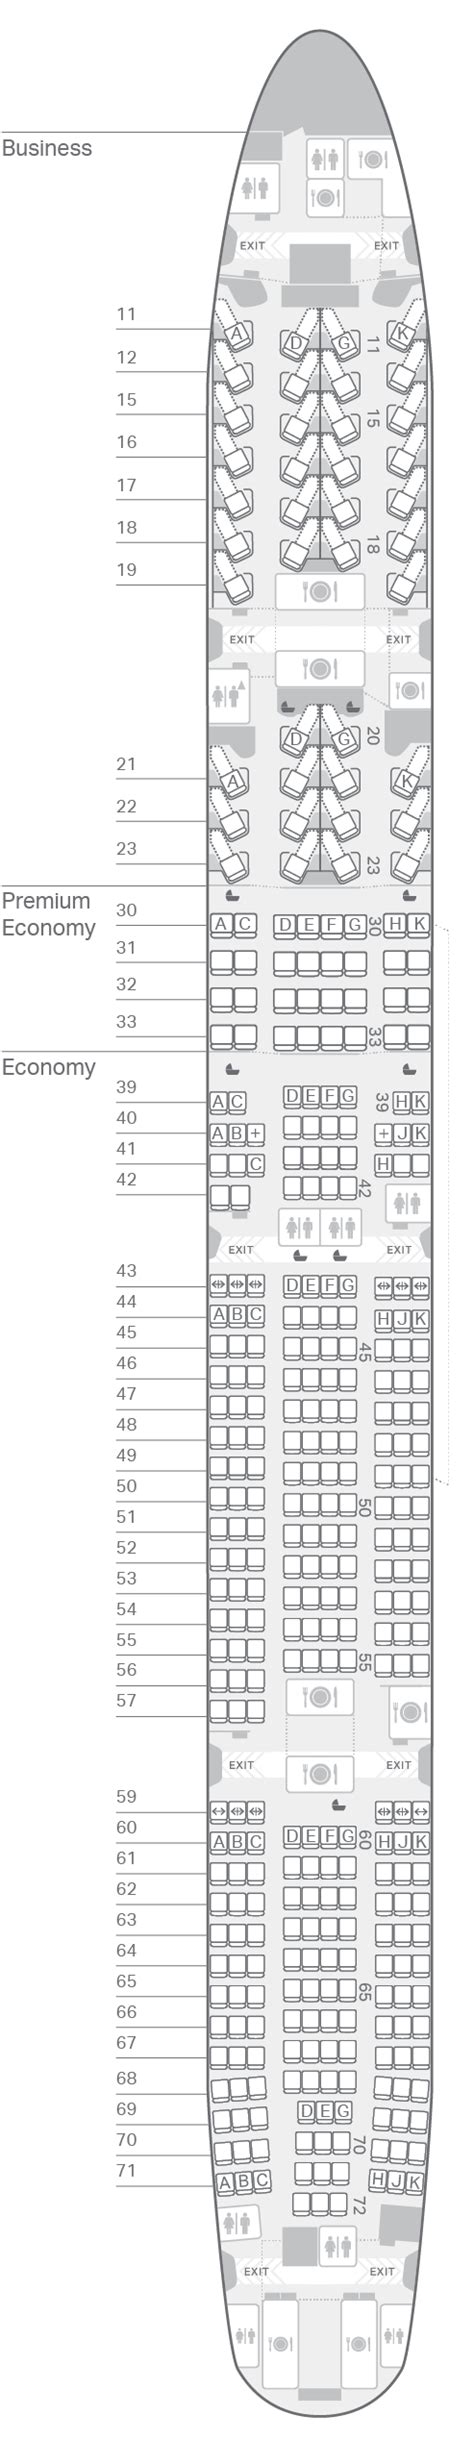 Delta Boeing Er Seating Chart Porn Sex Picture